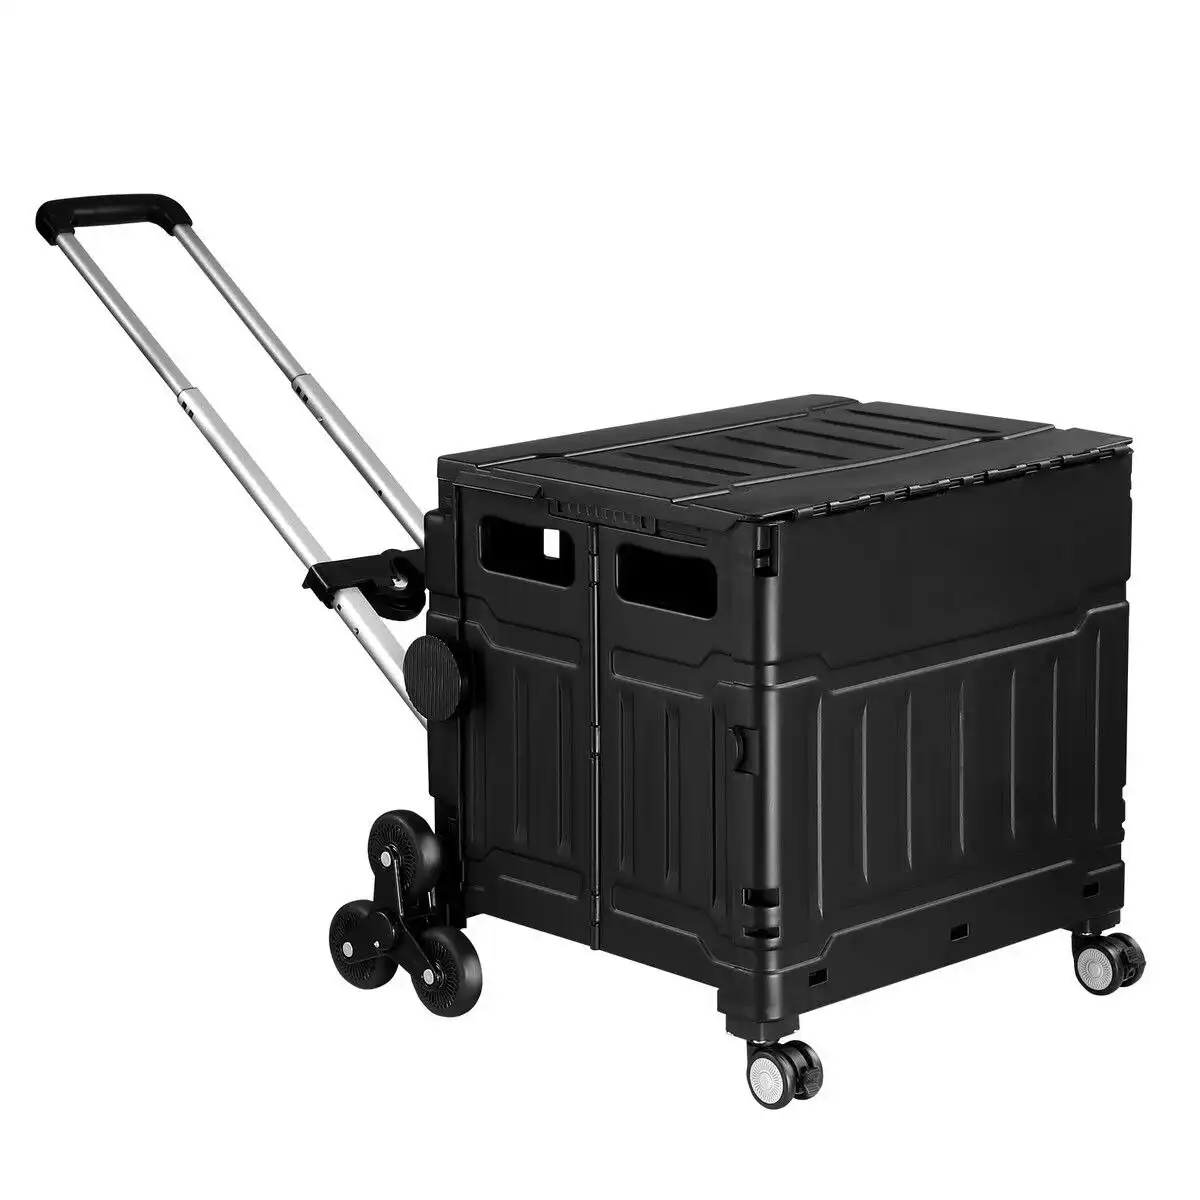 LUXSUITE 75L Shopping Trolley Cart Wheeled Grocery Utility Basket Bag Stair Climbing Rolling Folding Supermarket Granny Travel Wagon